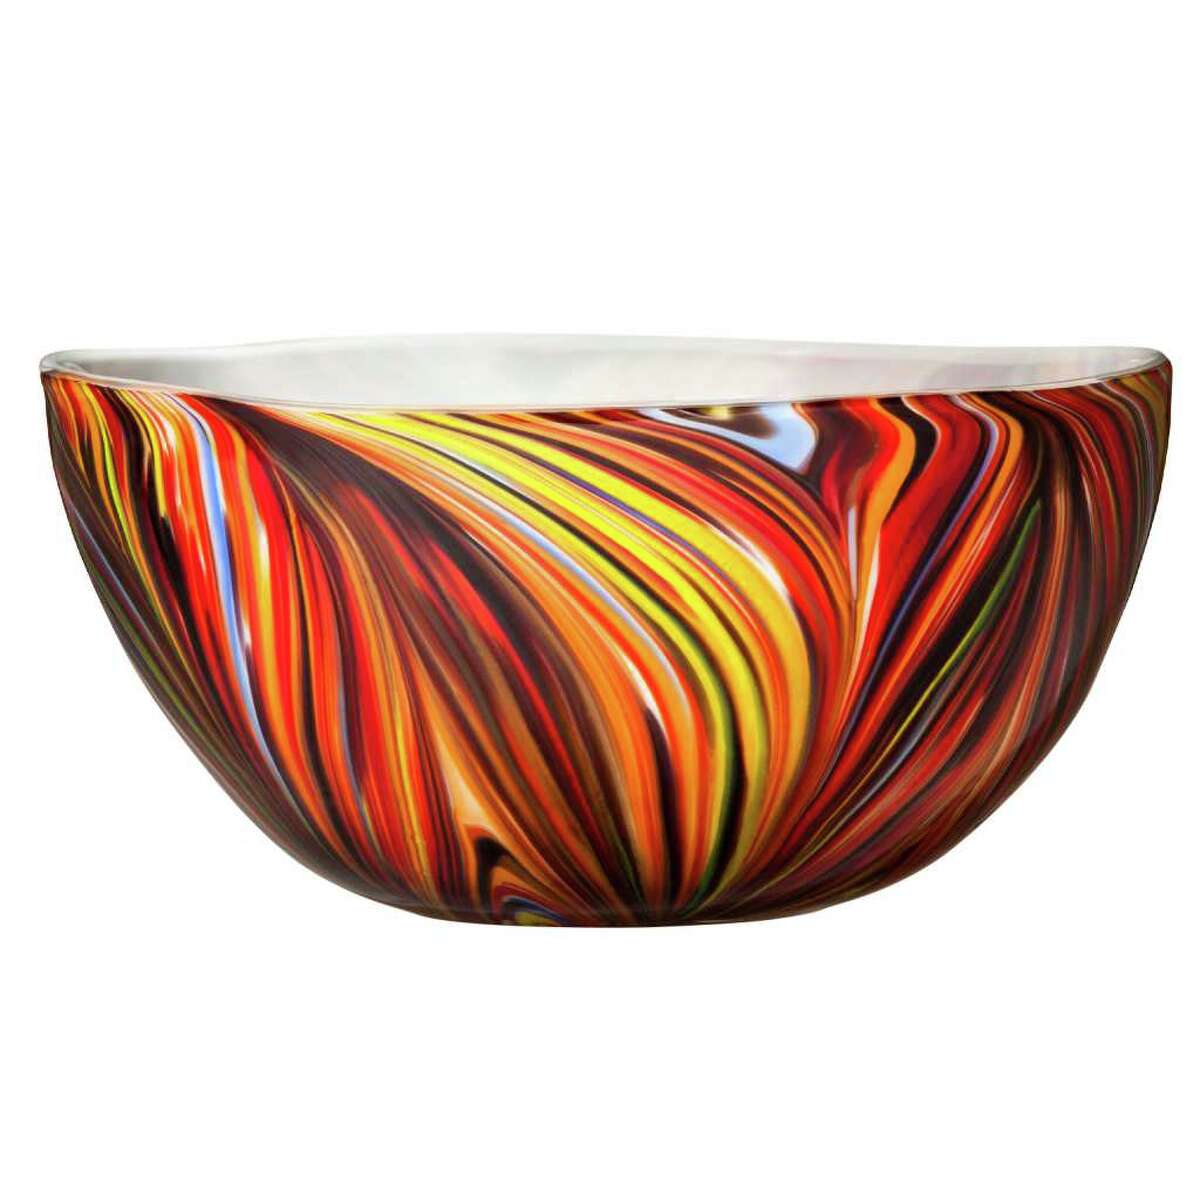 Missoni for Target home glass serving bowl, $29.99.